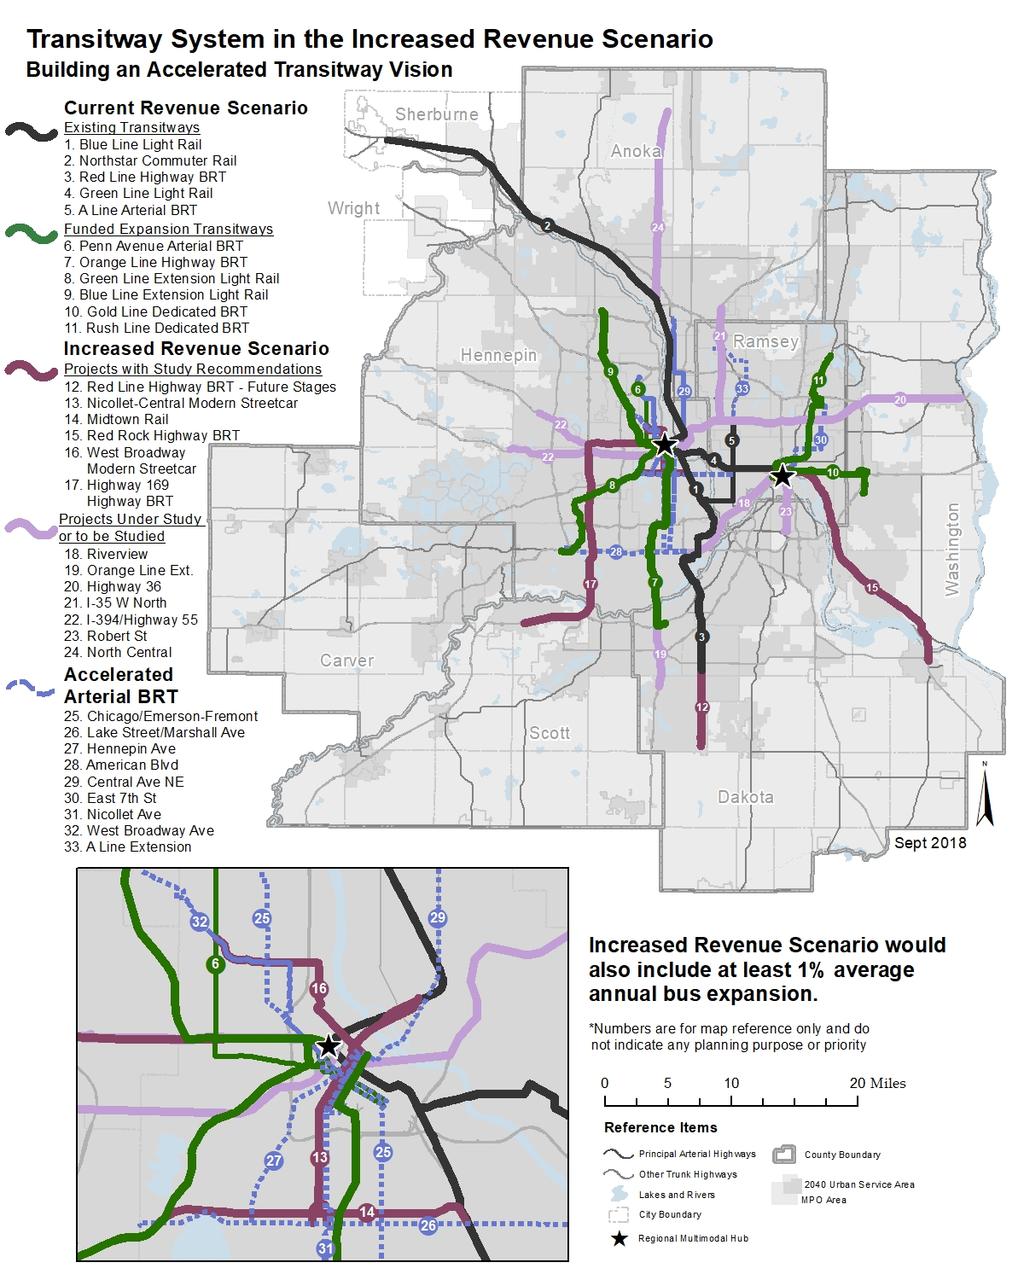 Figure 5: Map of Transitway System in an Increased Revenue Scenario Building an Accelerated